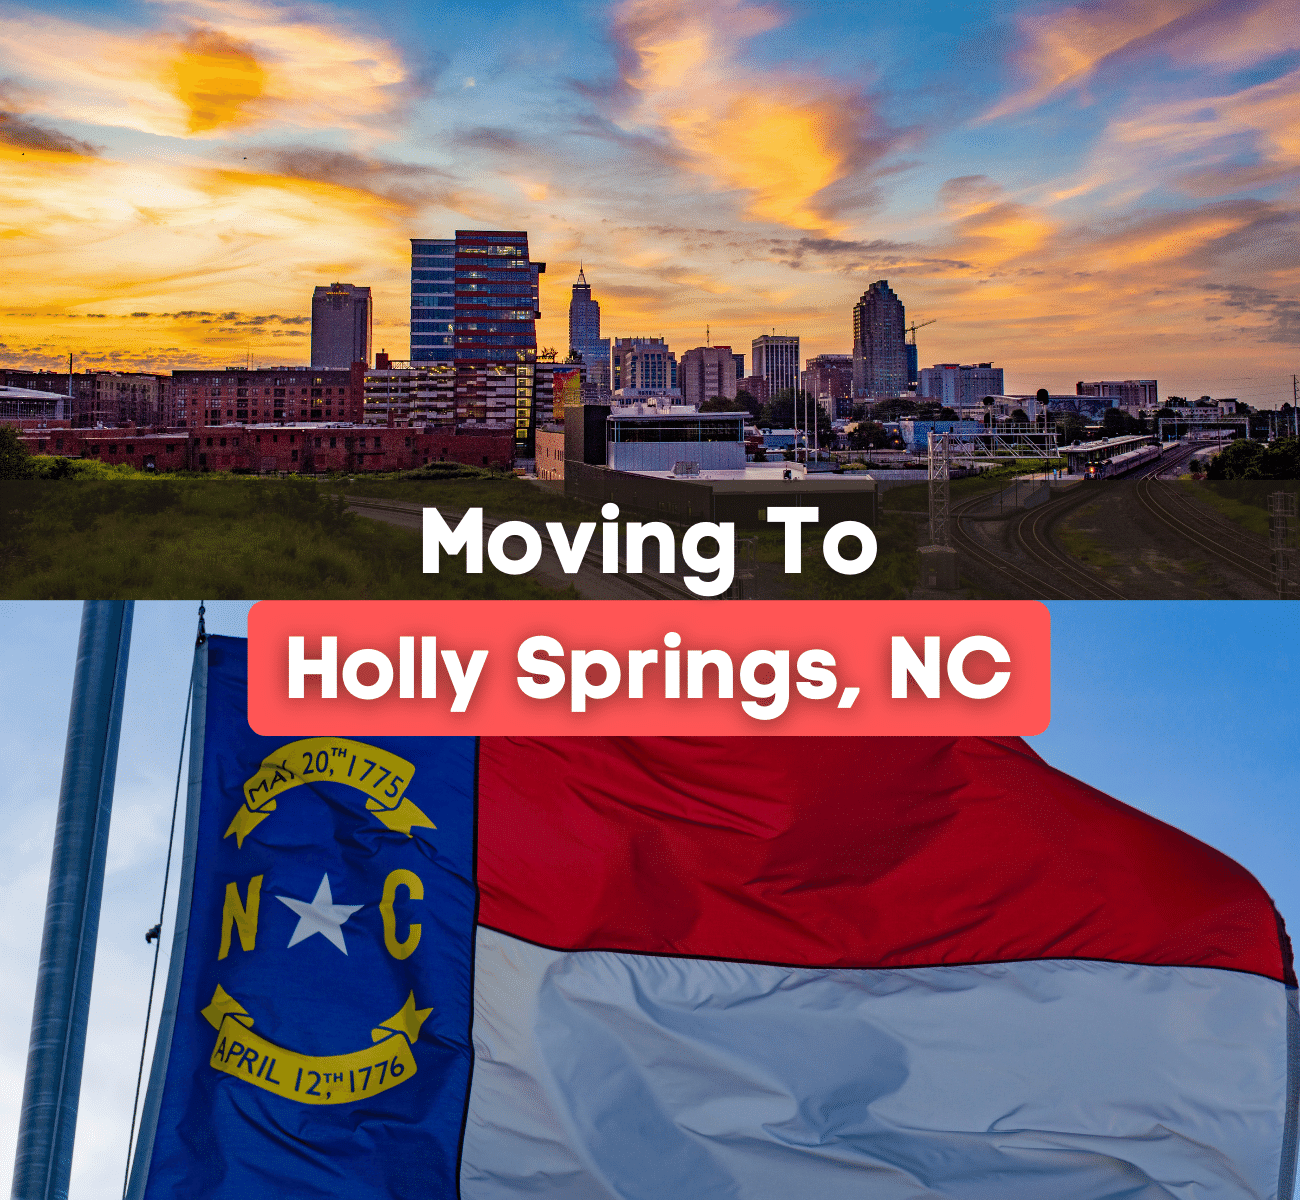 Moving to Holly Springs NC - What is it like living in Holly Springs?